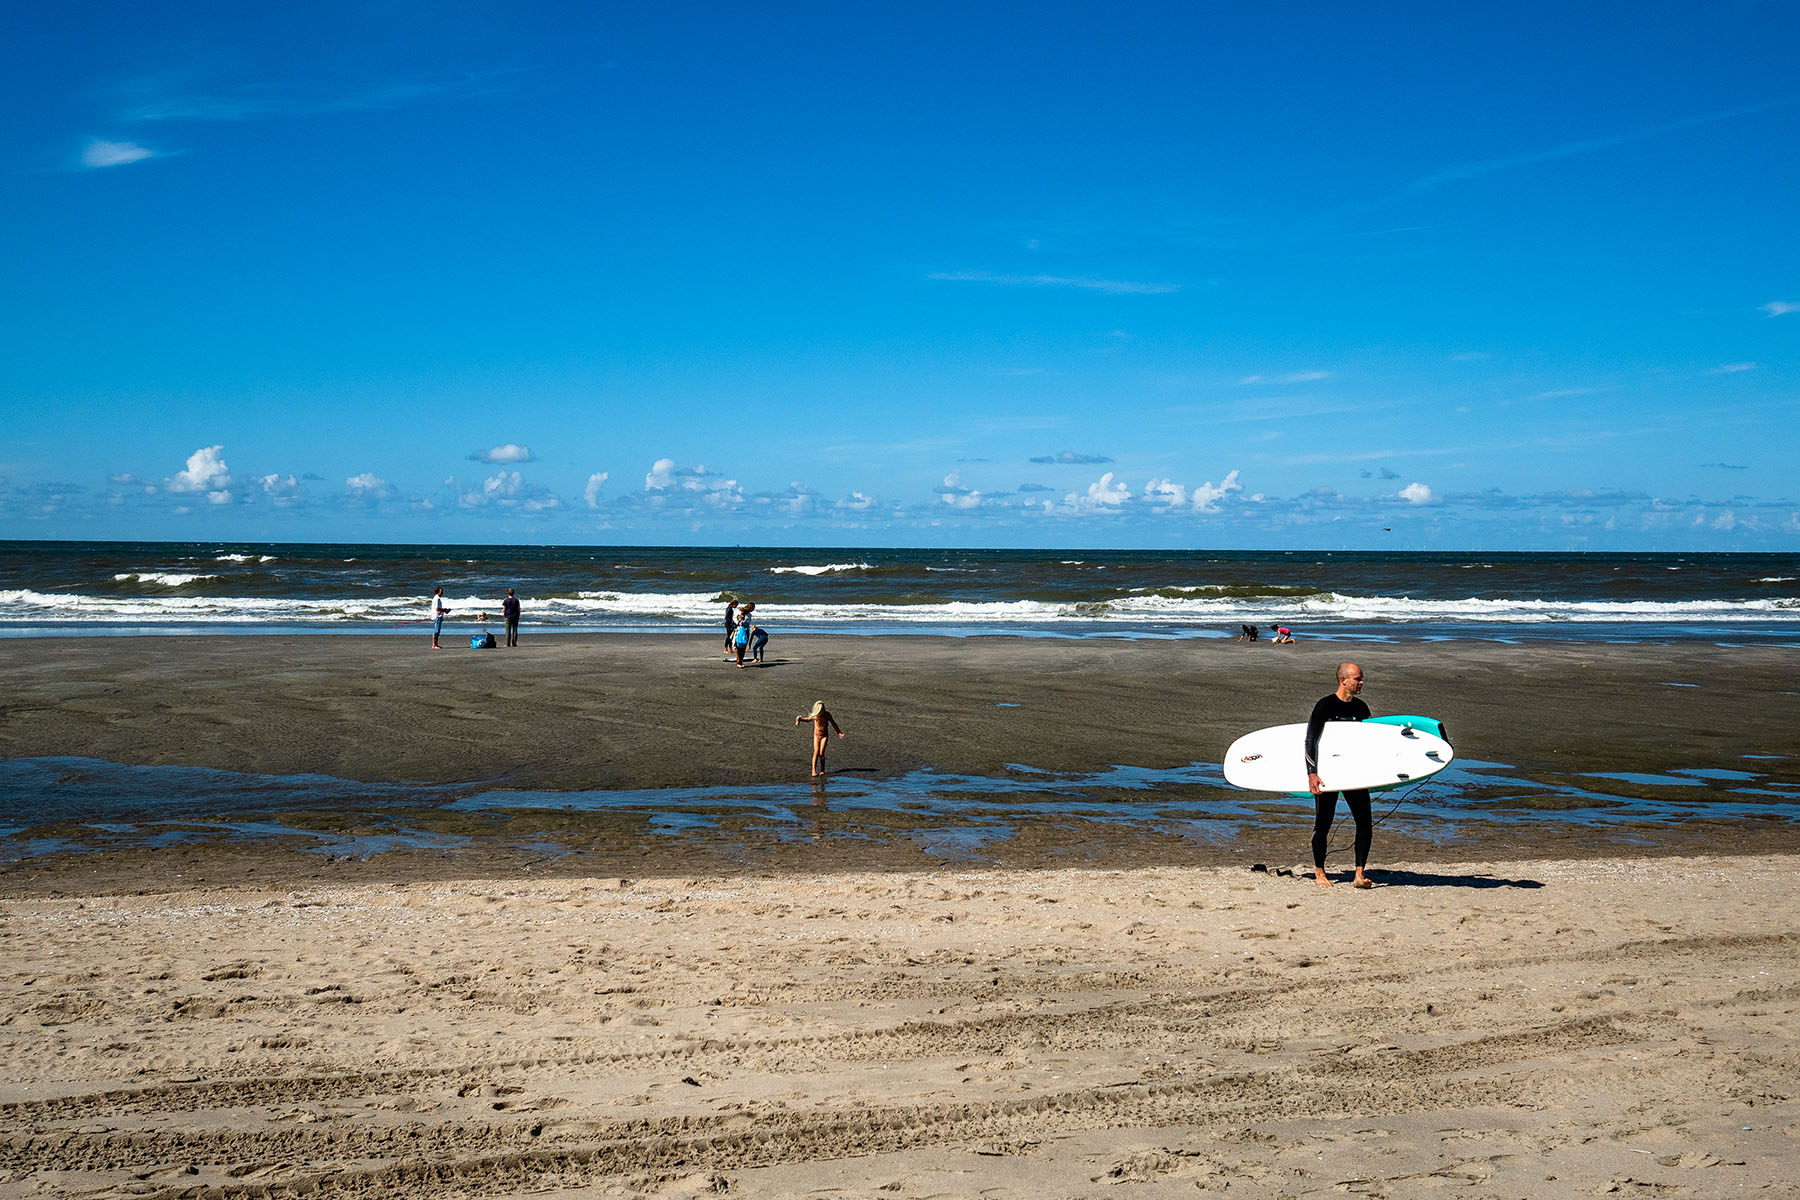 People are enjoying a sunny day at the beach of Hoek van Holland. One person is carrying a surf board.